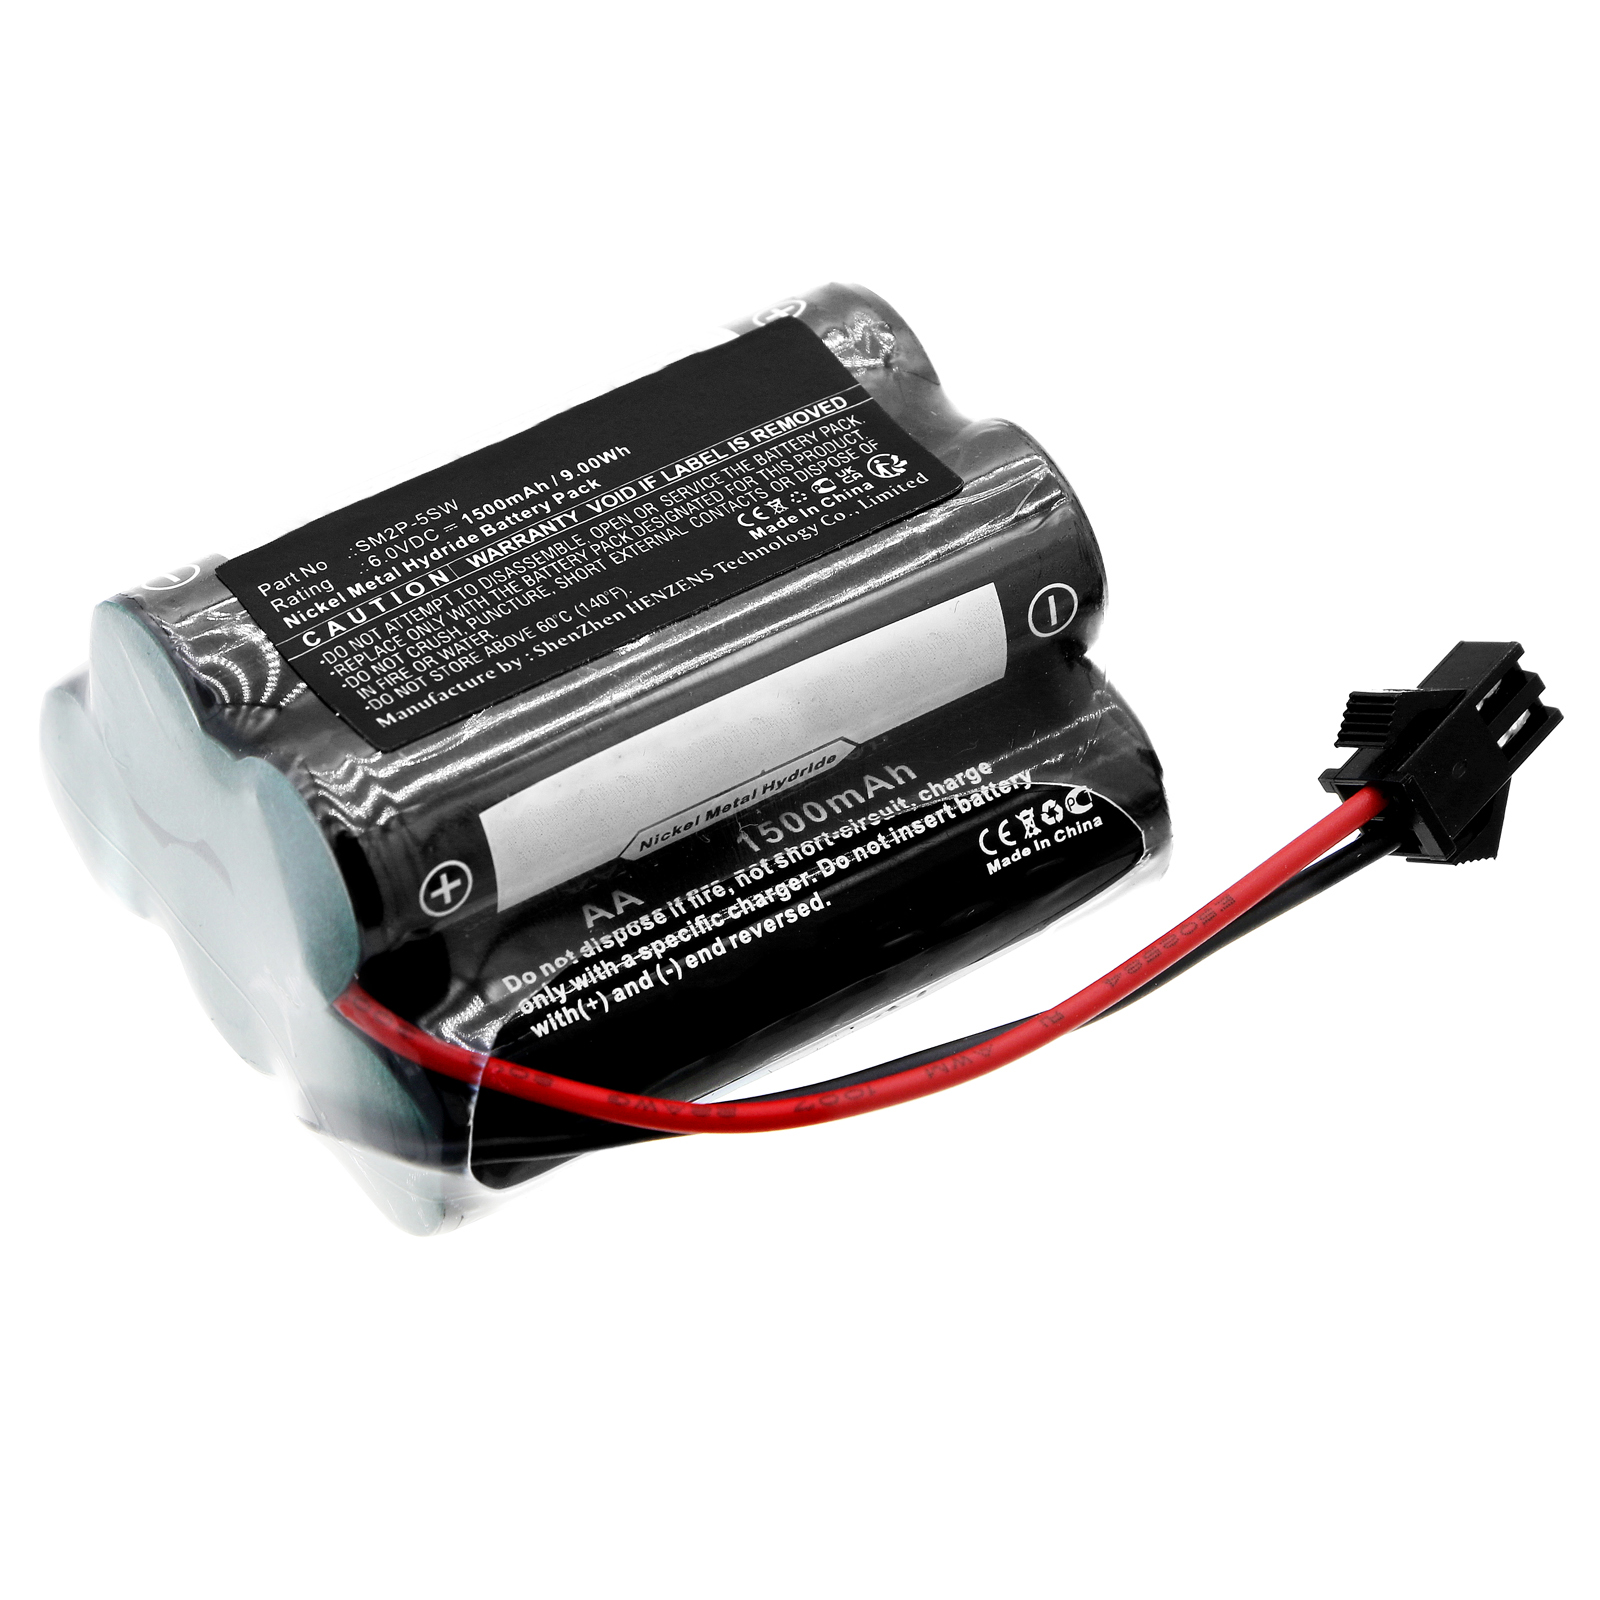 Synergy Digital Solar Battery, Compatible with Sunforce SM2P-5SW Solar Battery (Ni-MH, 6V, 1500mAh)